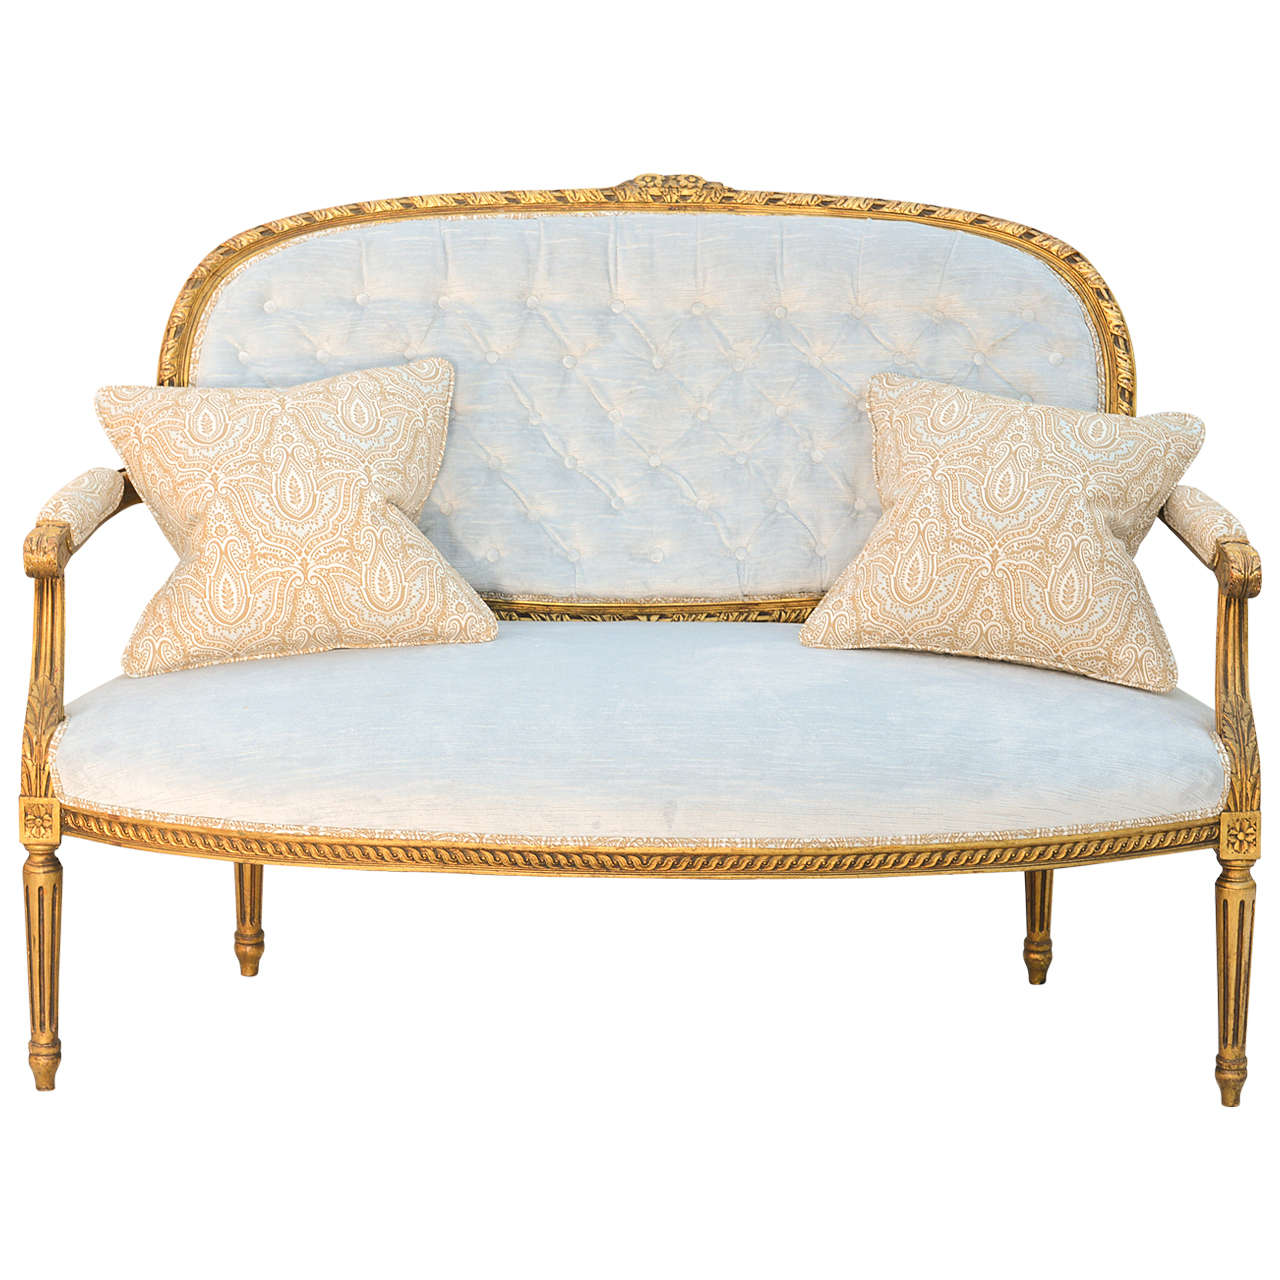 Louis XVI 19th Century French Giltwood Canape Settee